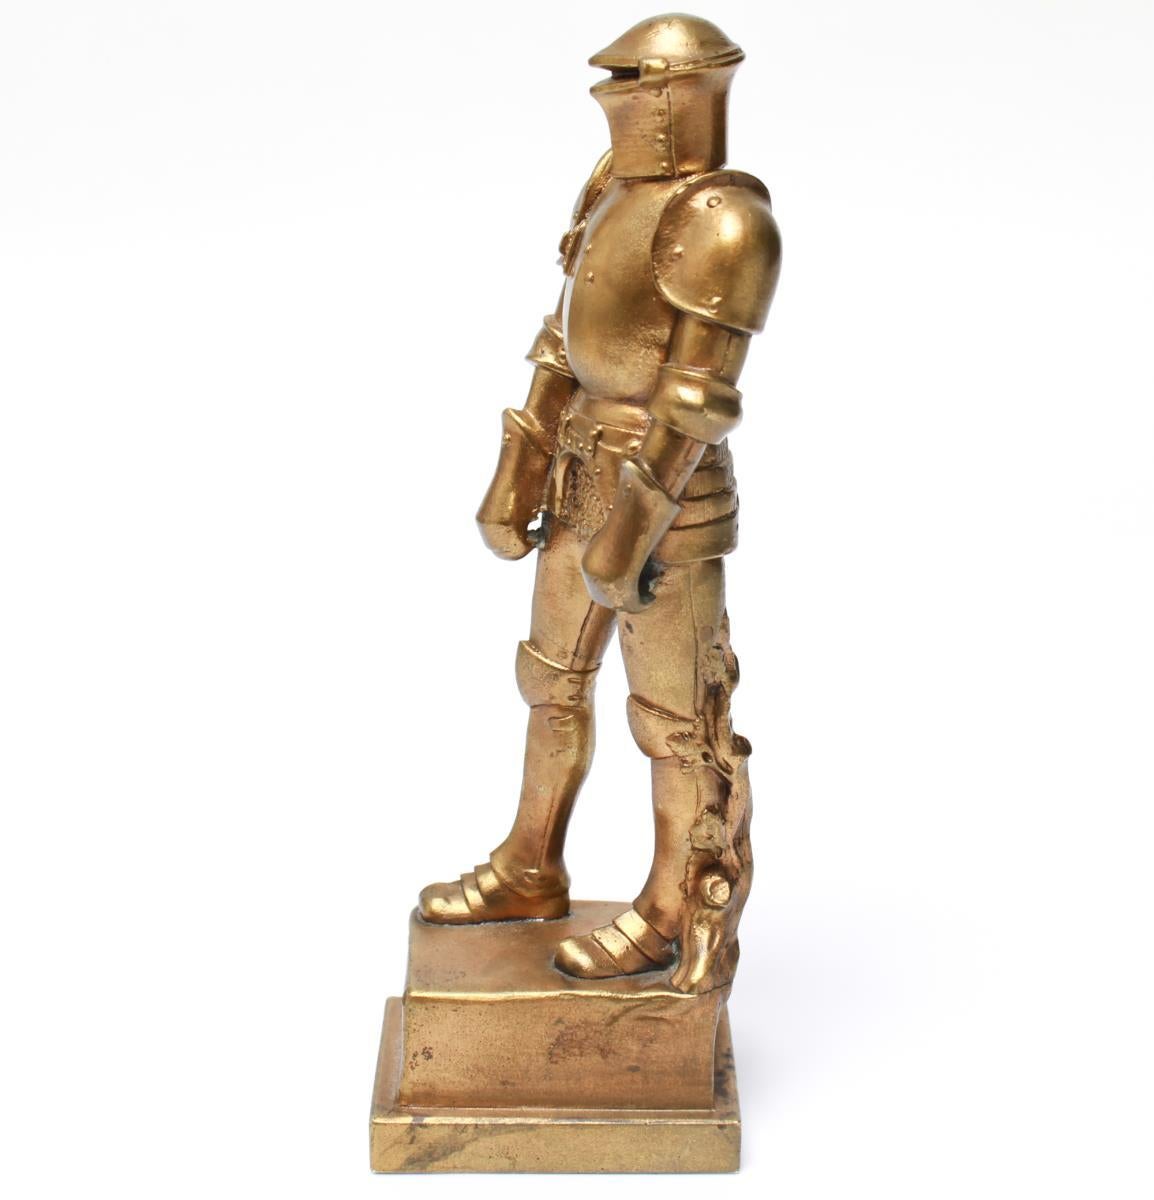 World War I Militaria gilt-bronzed cast iron figure of a knight in armor by Josef Muellner (Austrian 1879-1968). The knight stands atop a plinth inscribed 